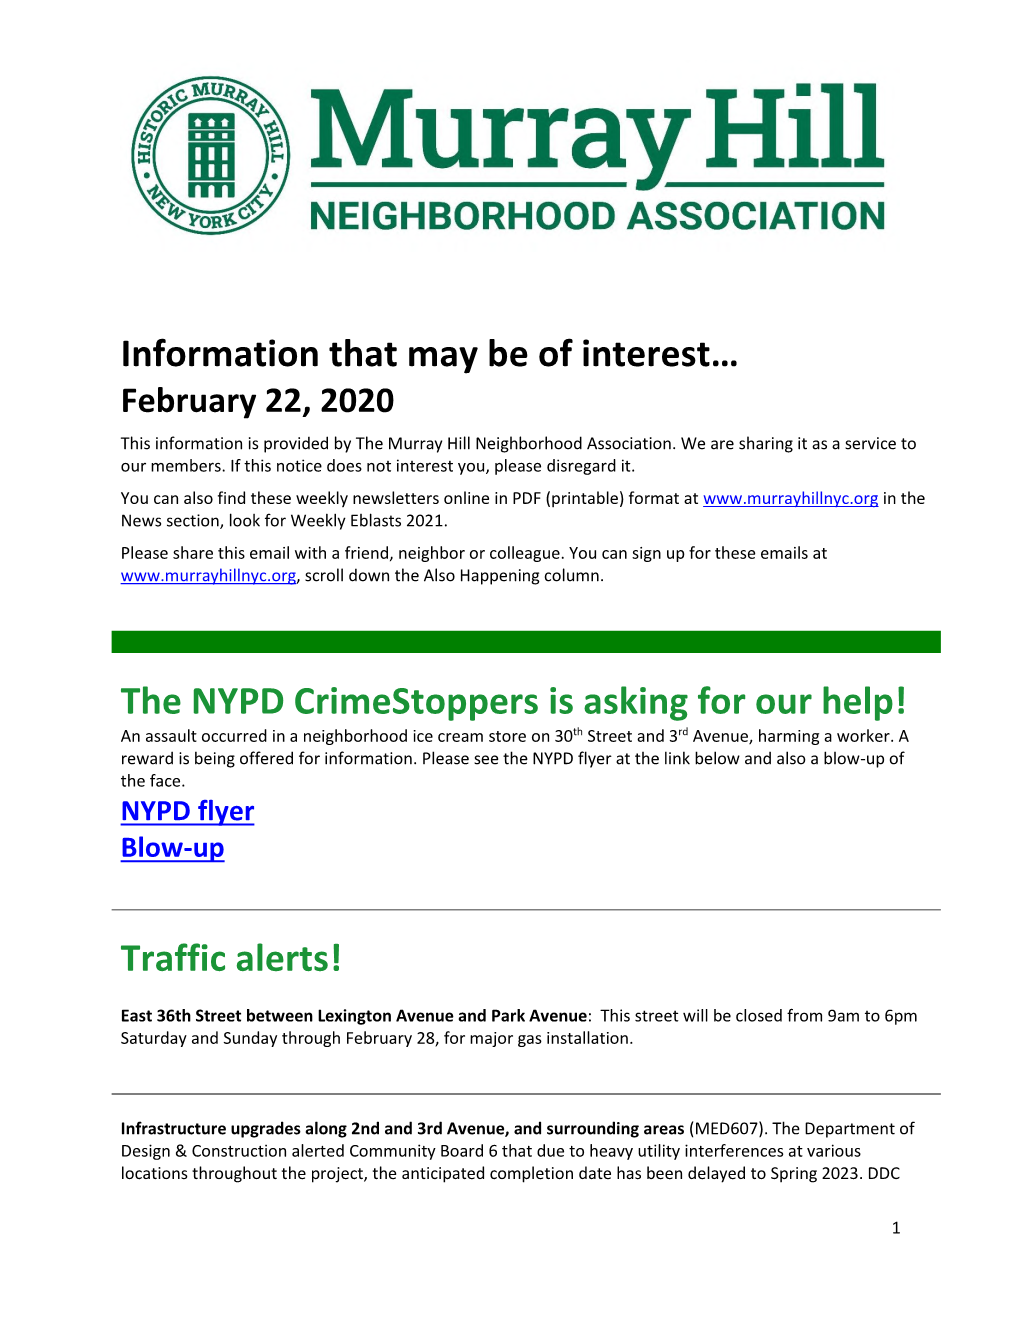 The NYPD Crimestoppers Is Asking for Our Help! Traffic Alerts!